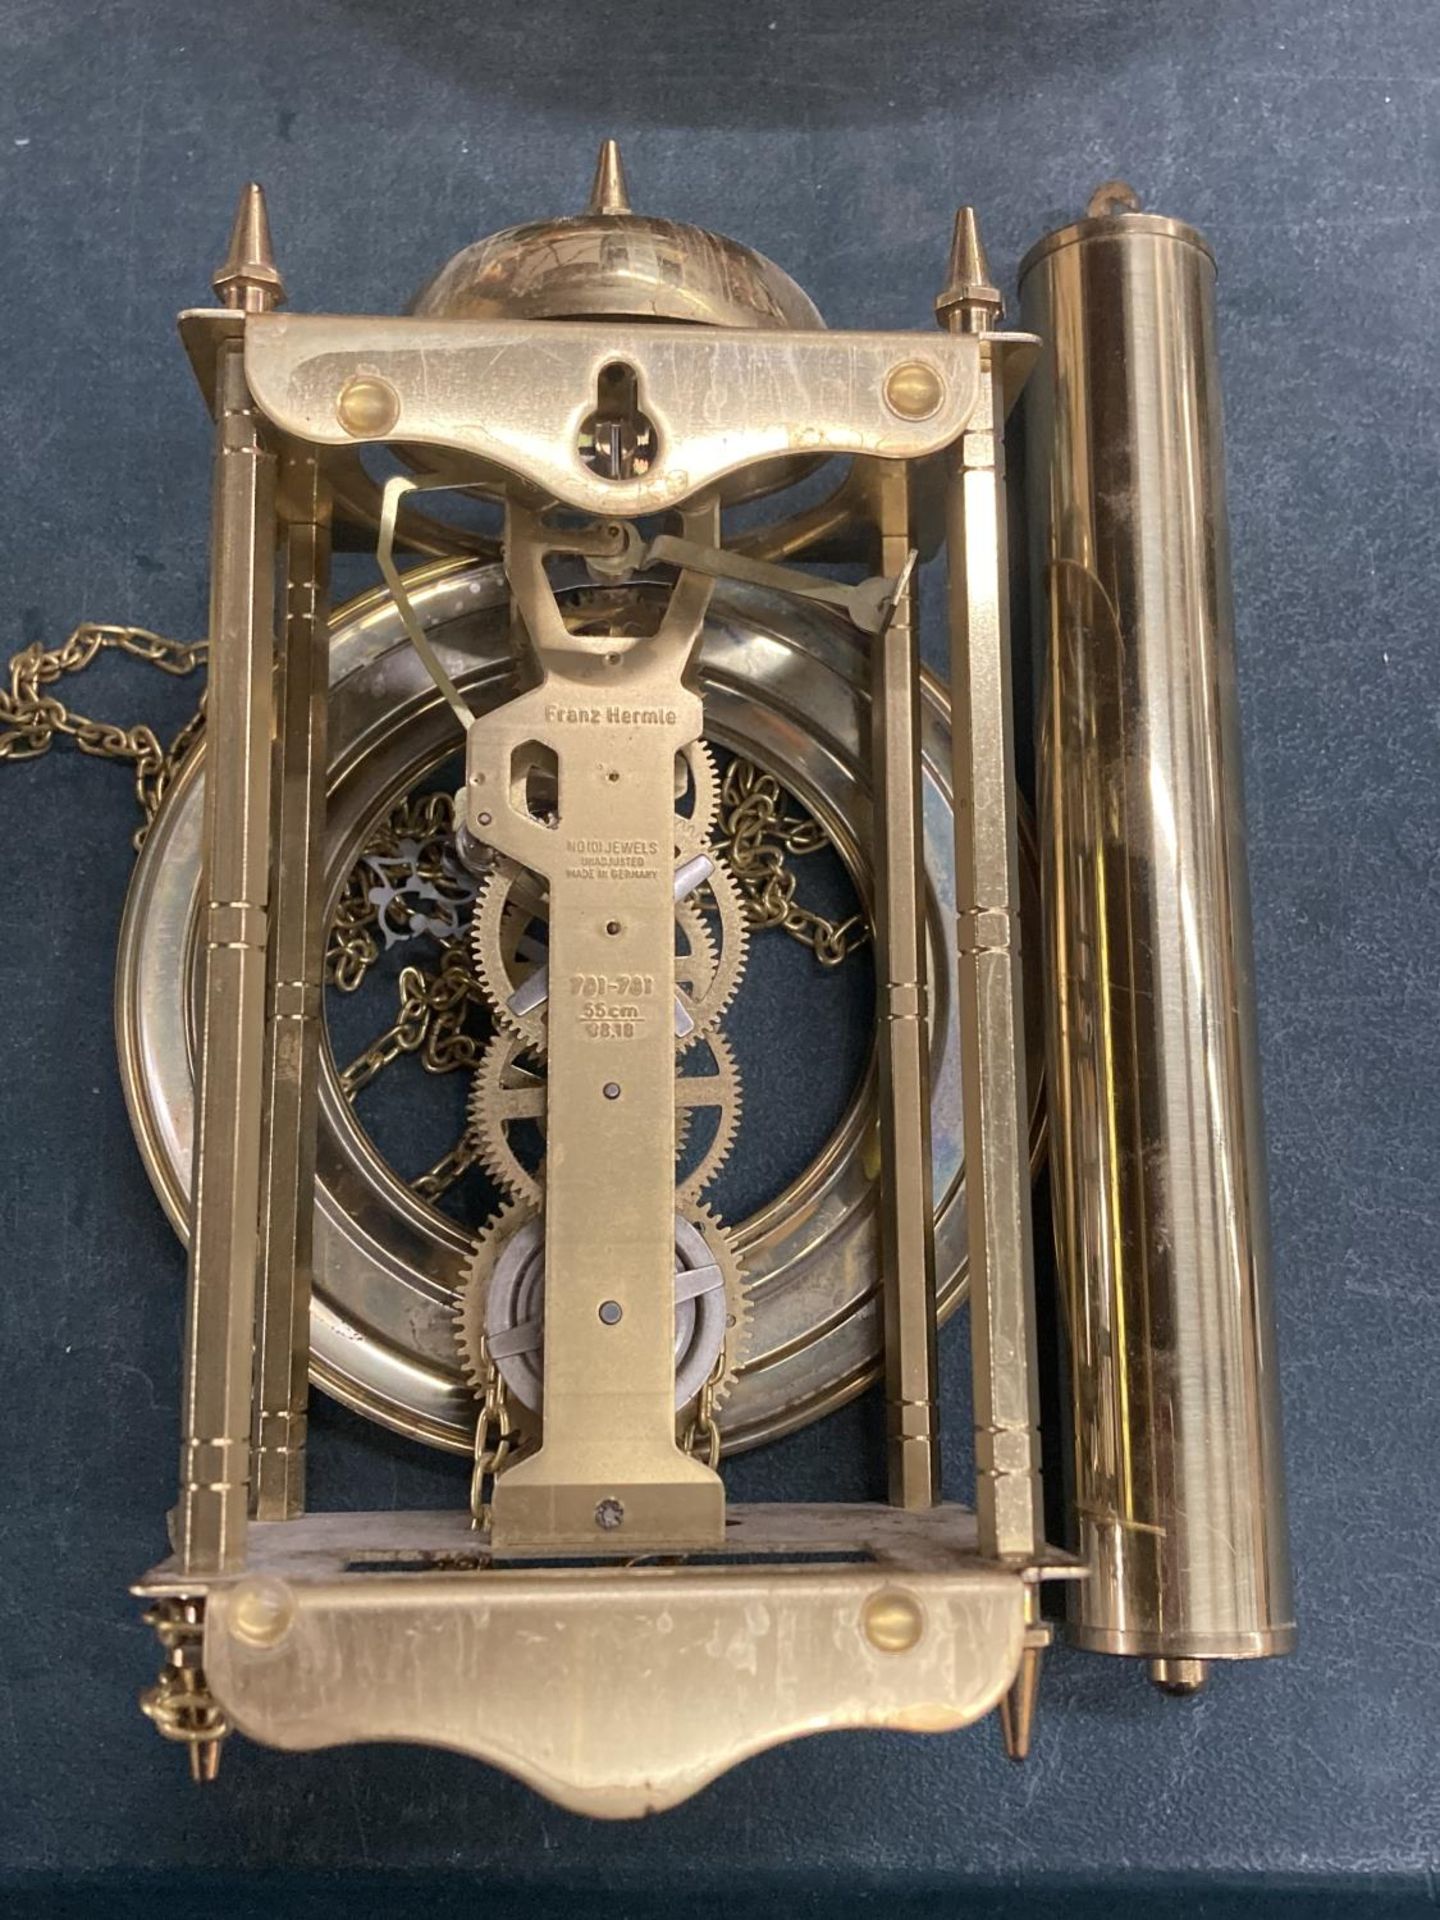 A FRANZ HERMIE GERMAN CLOCK - Image 3 of 4